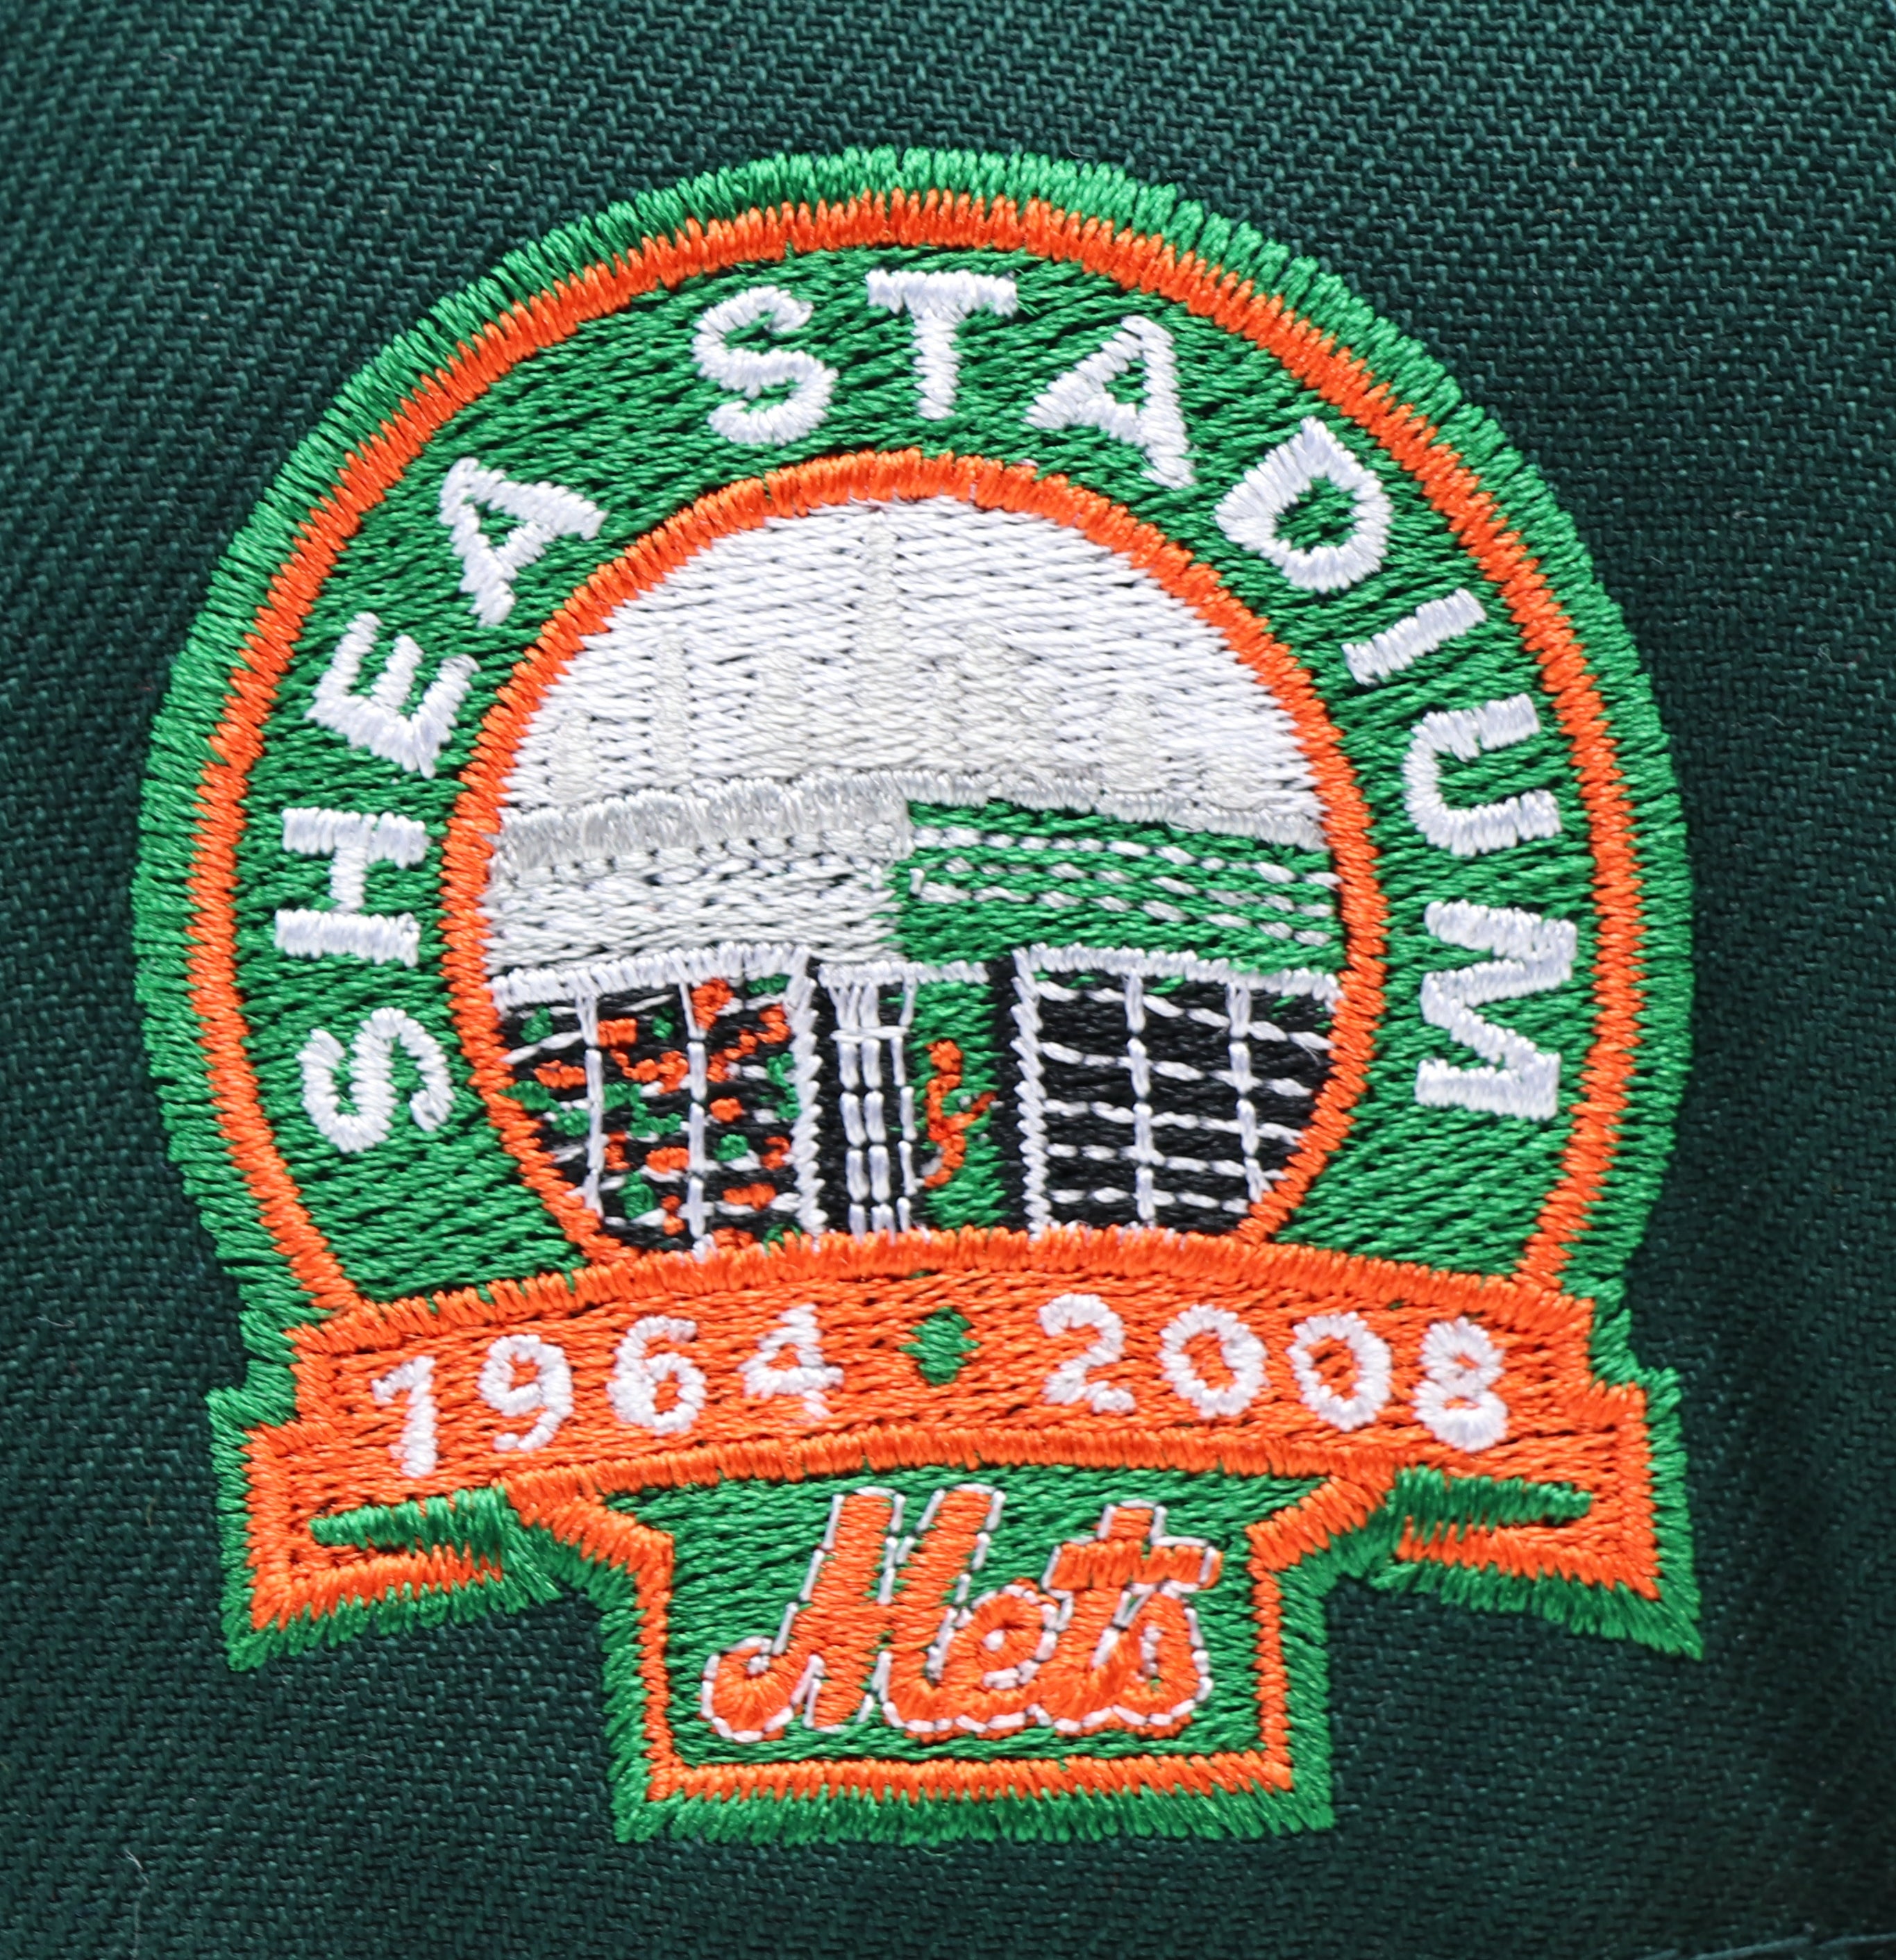 NEW YORK METS (GREEN) (SHEA STADIUM 1964-2008) NEW ERA 59FIFTY FITTED